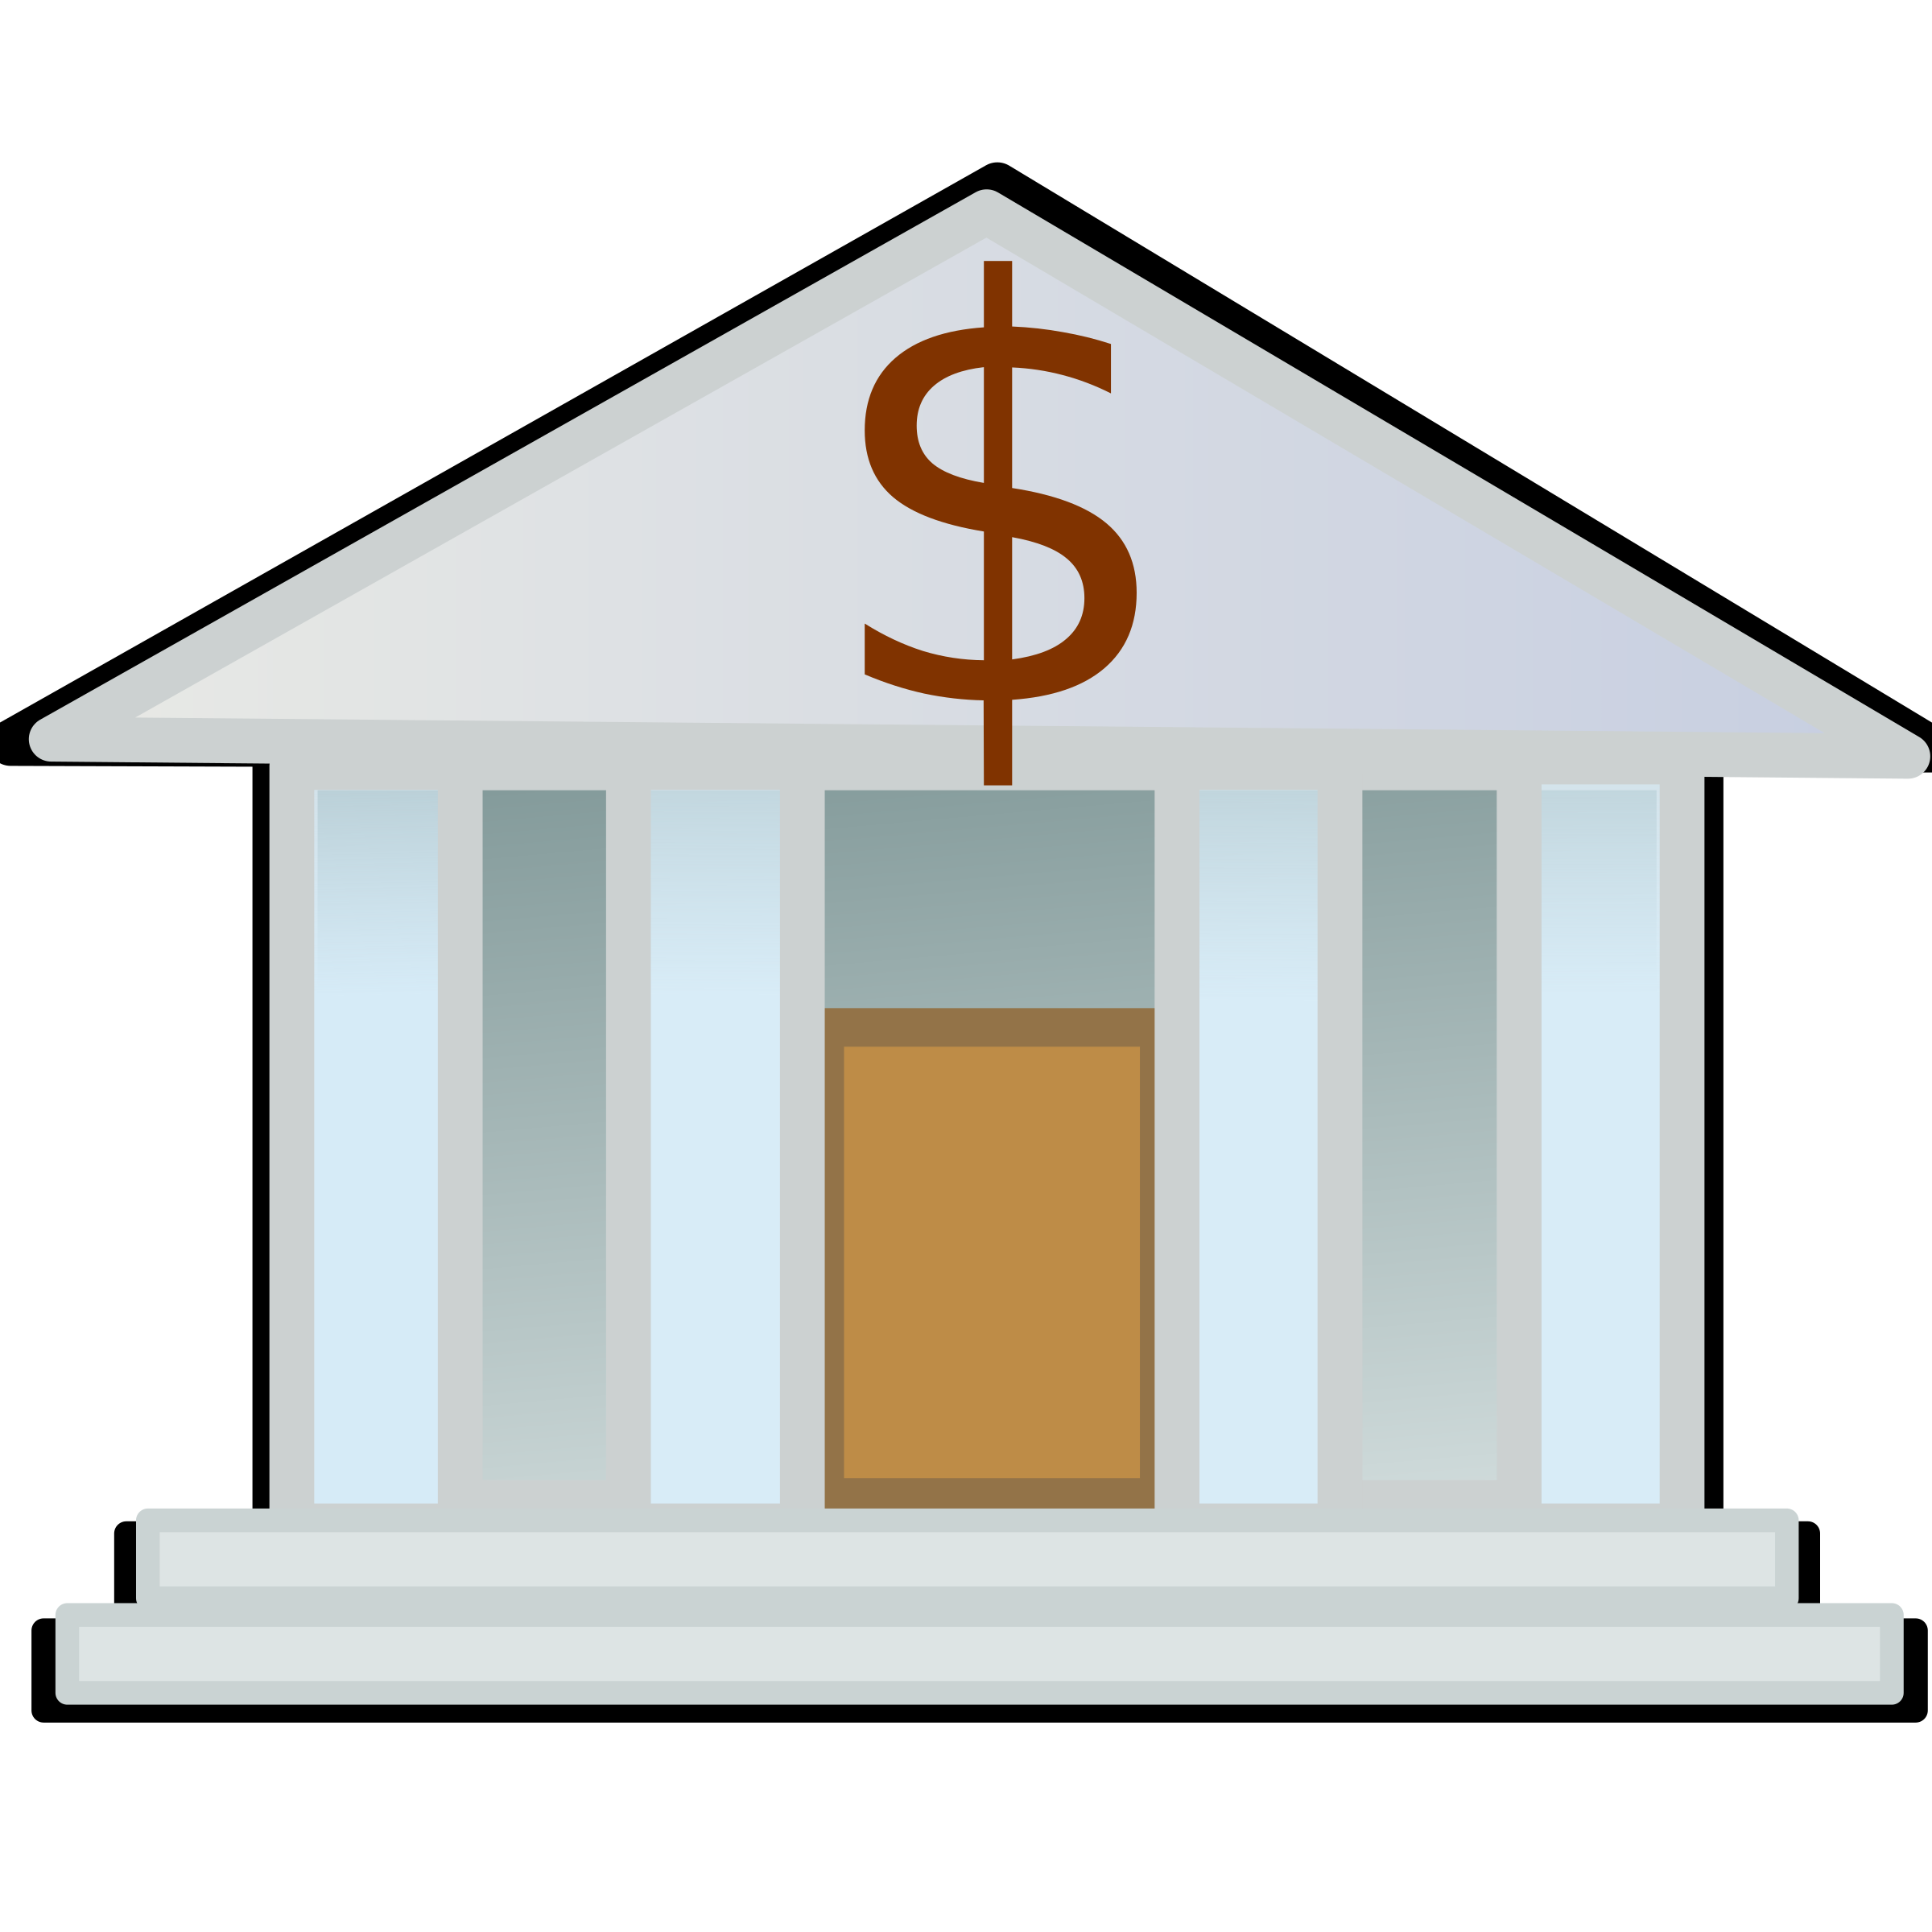 banker clipart - photo #48